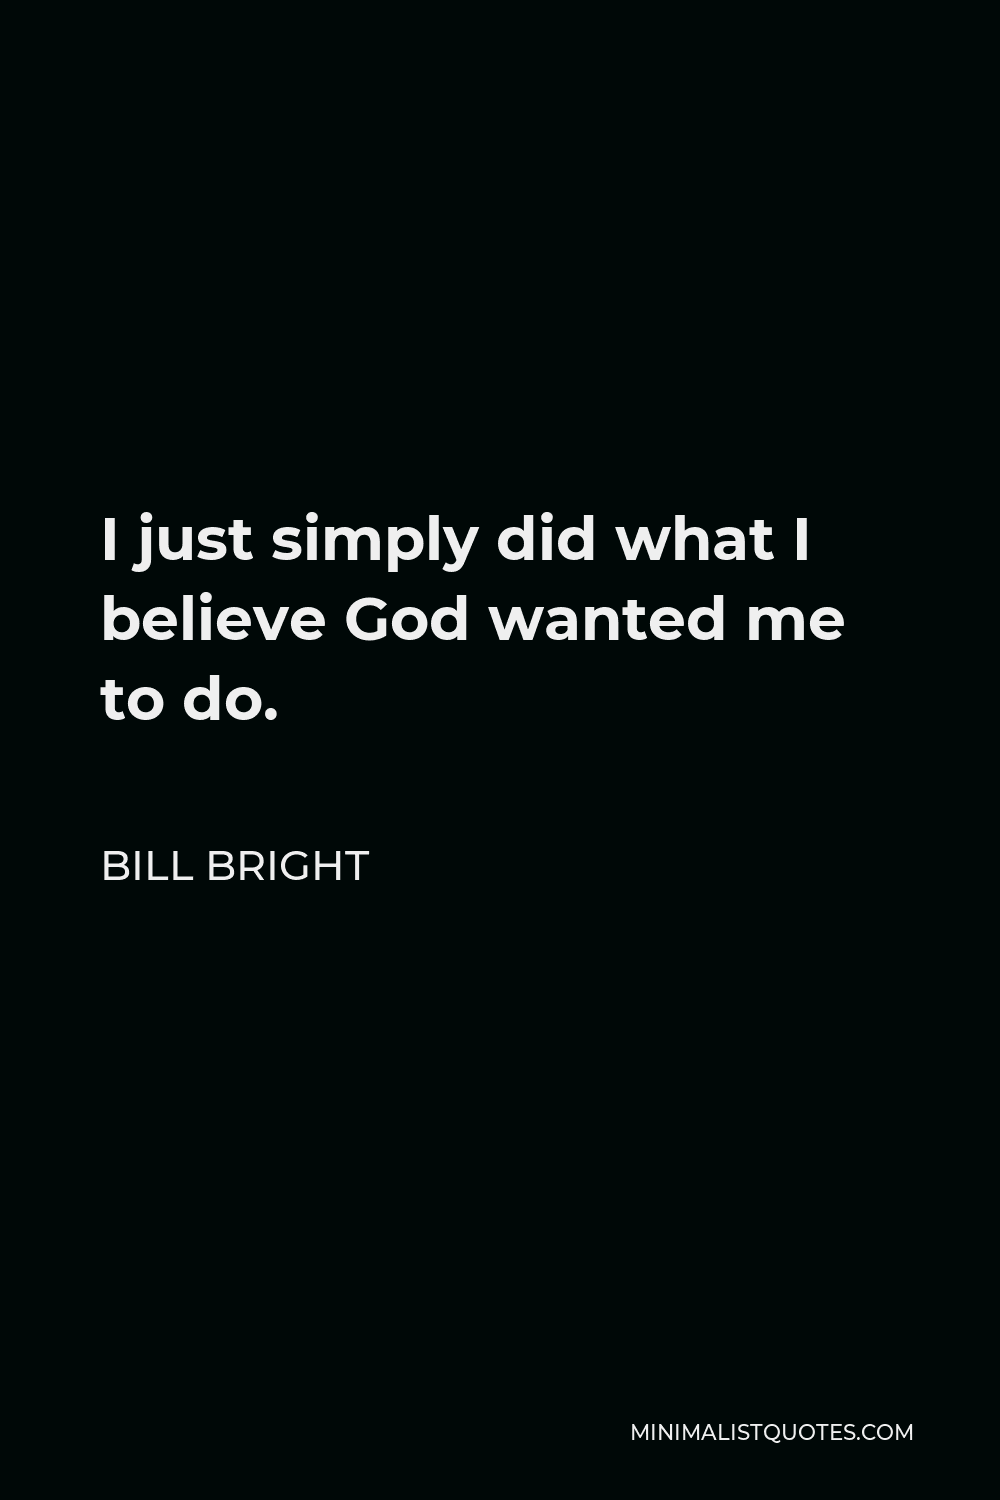 Bill Bright Quote - I just simply did what I believe God wanted me to do.